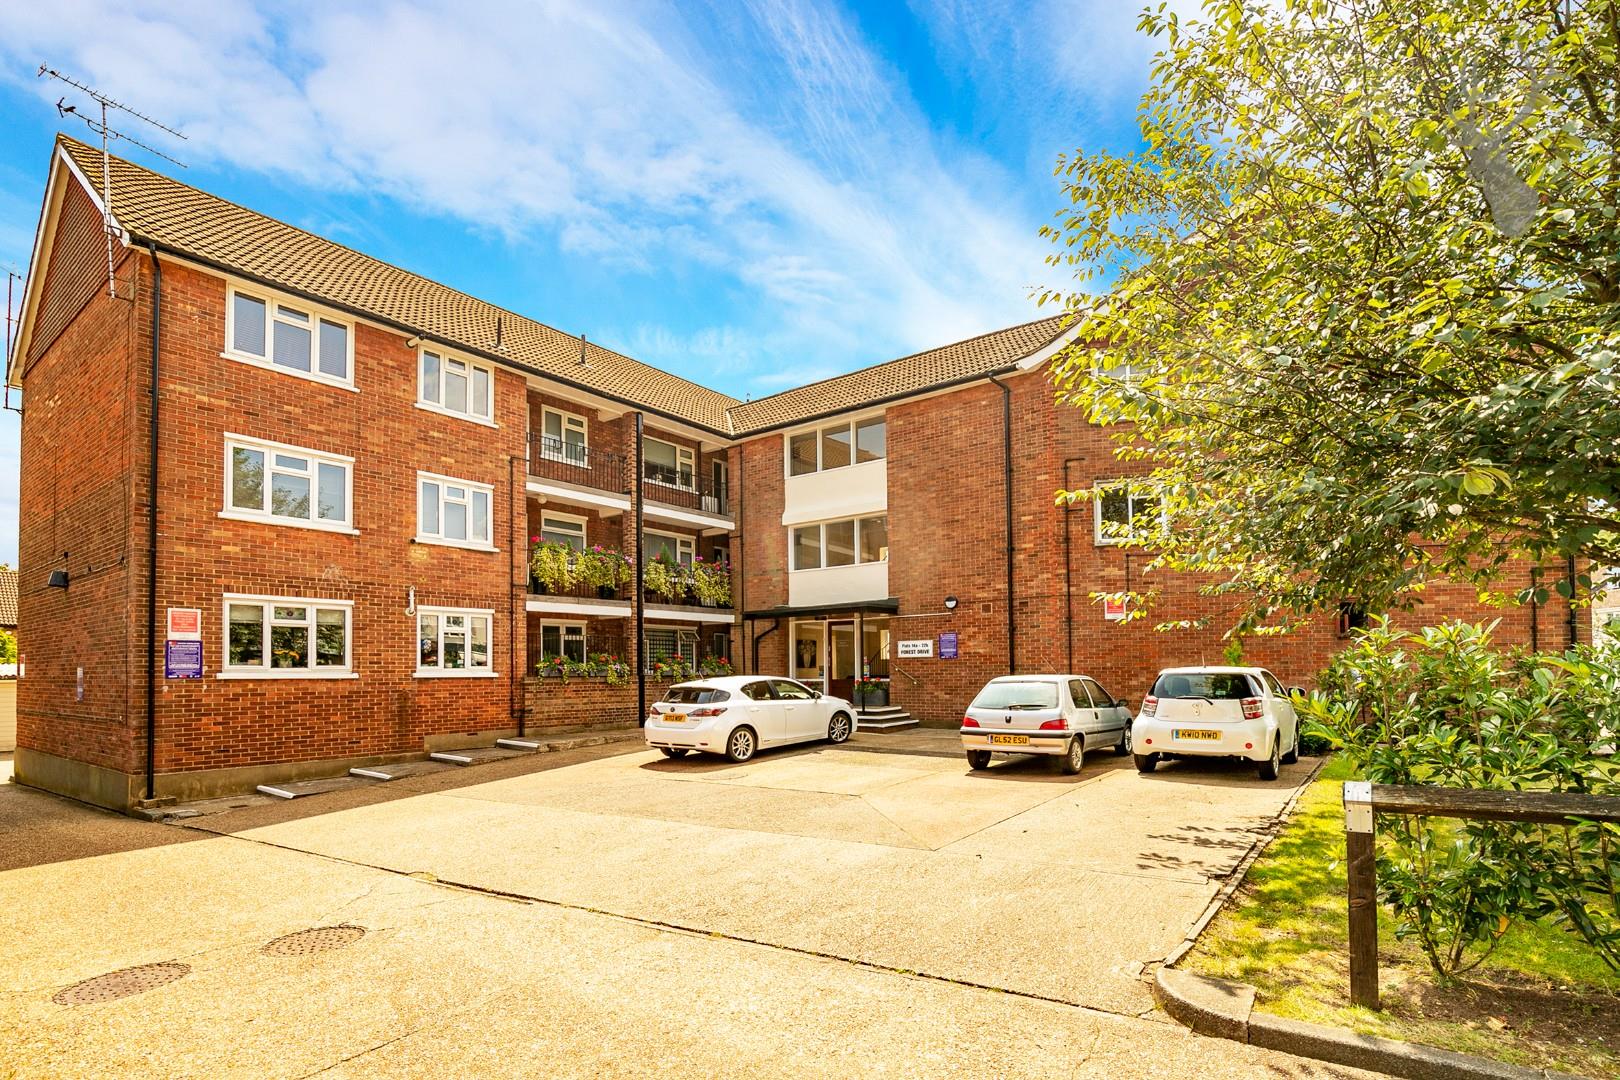 Similar Property: Apartment in Theydon Bois